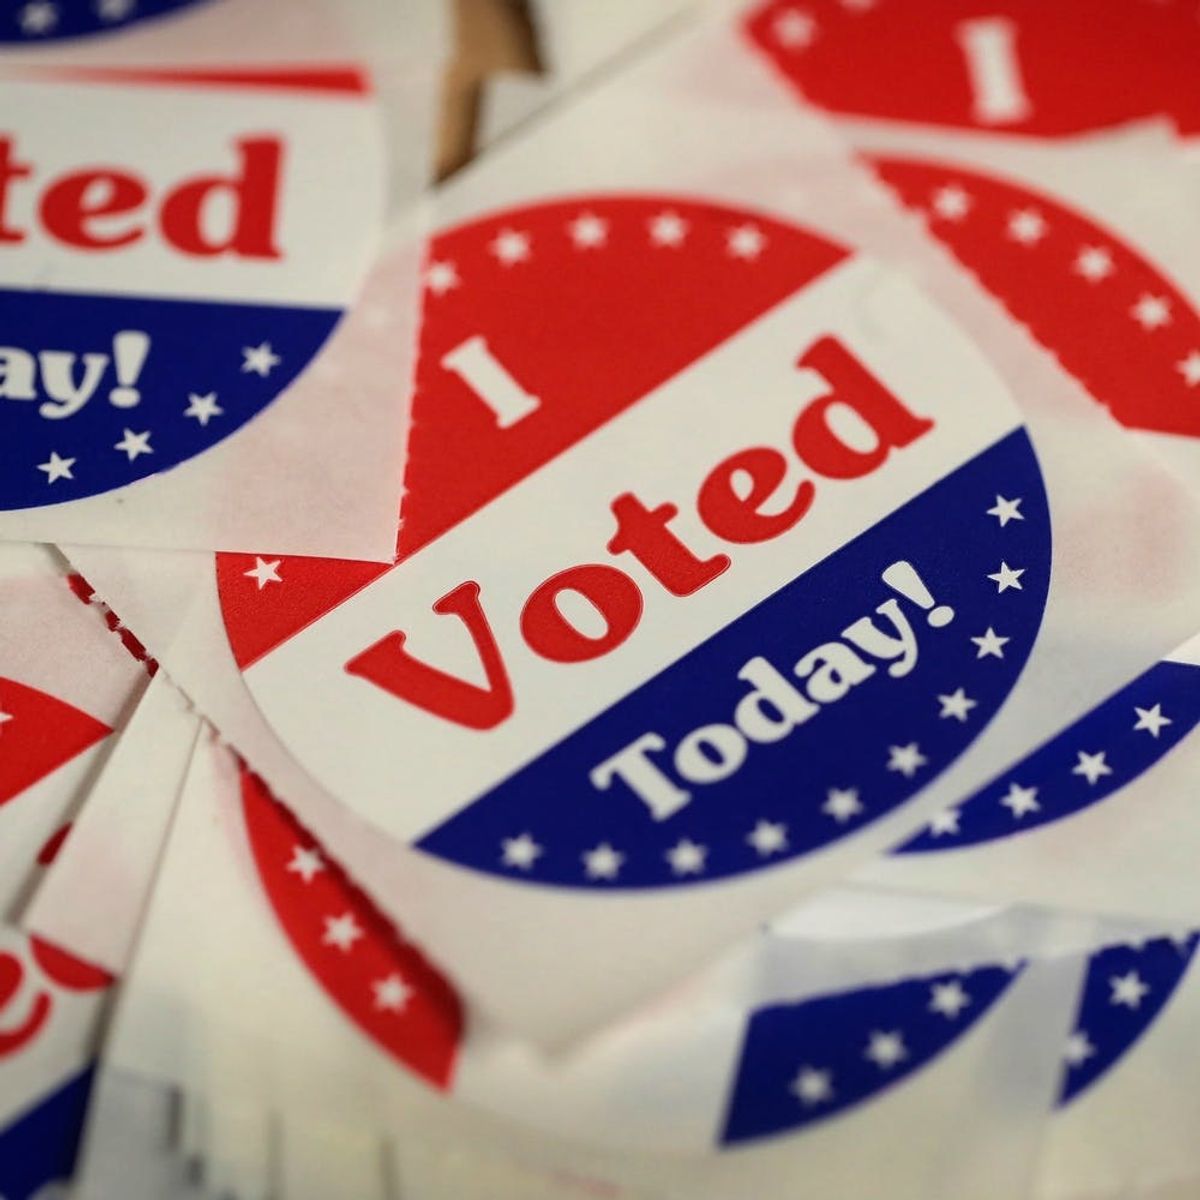 Everything You Need to Know to Vote on Election Day